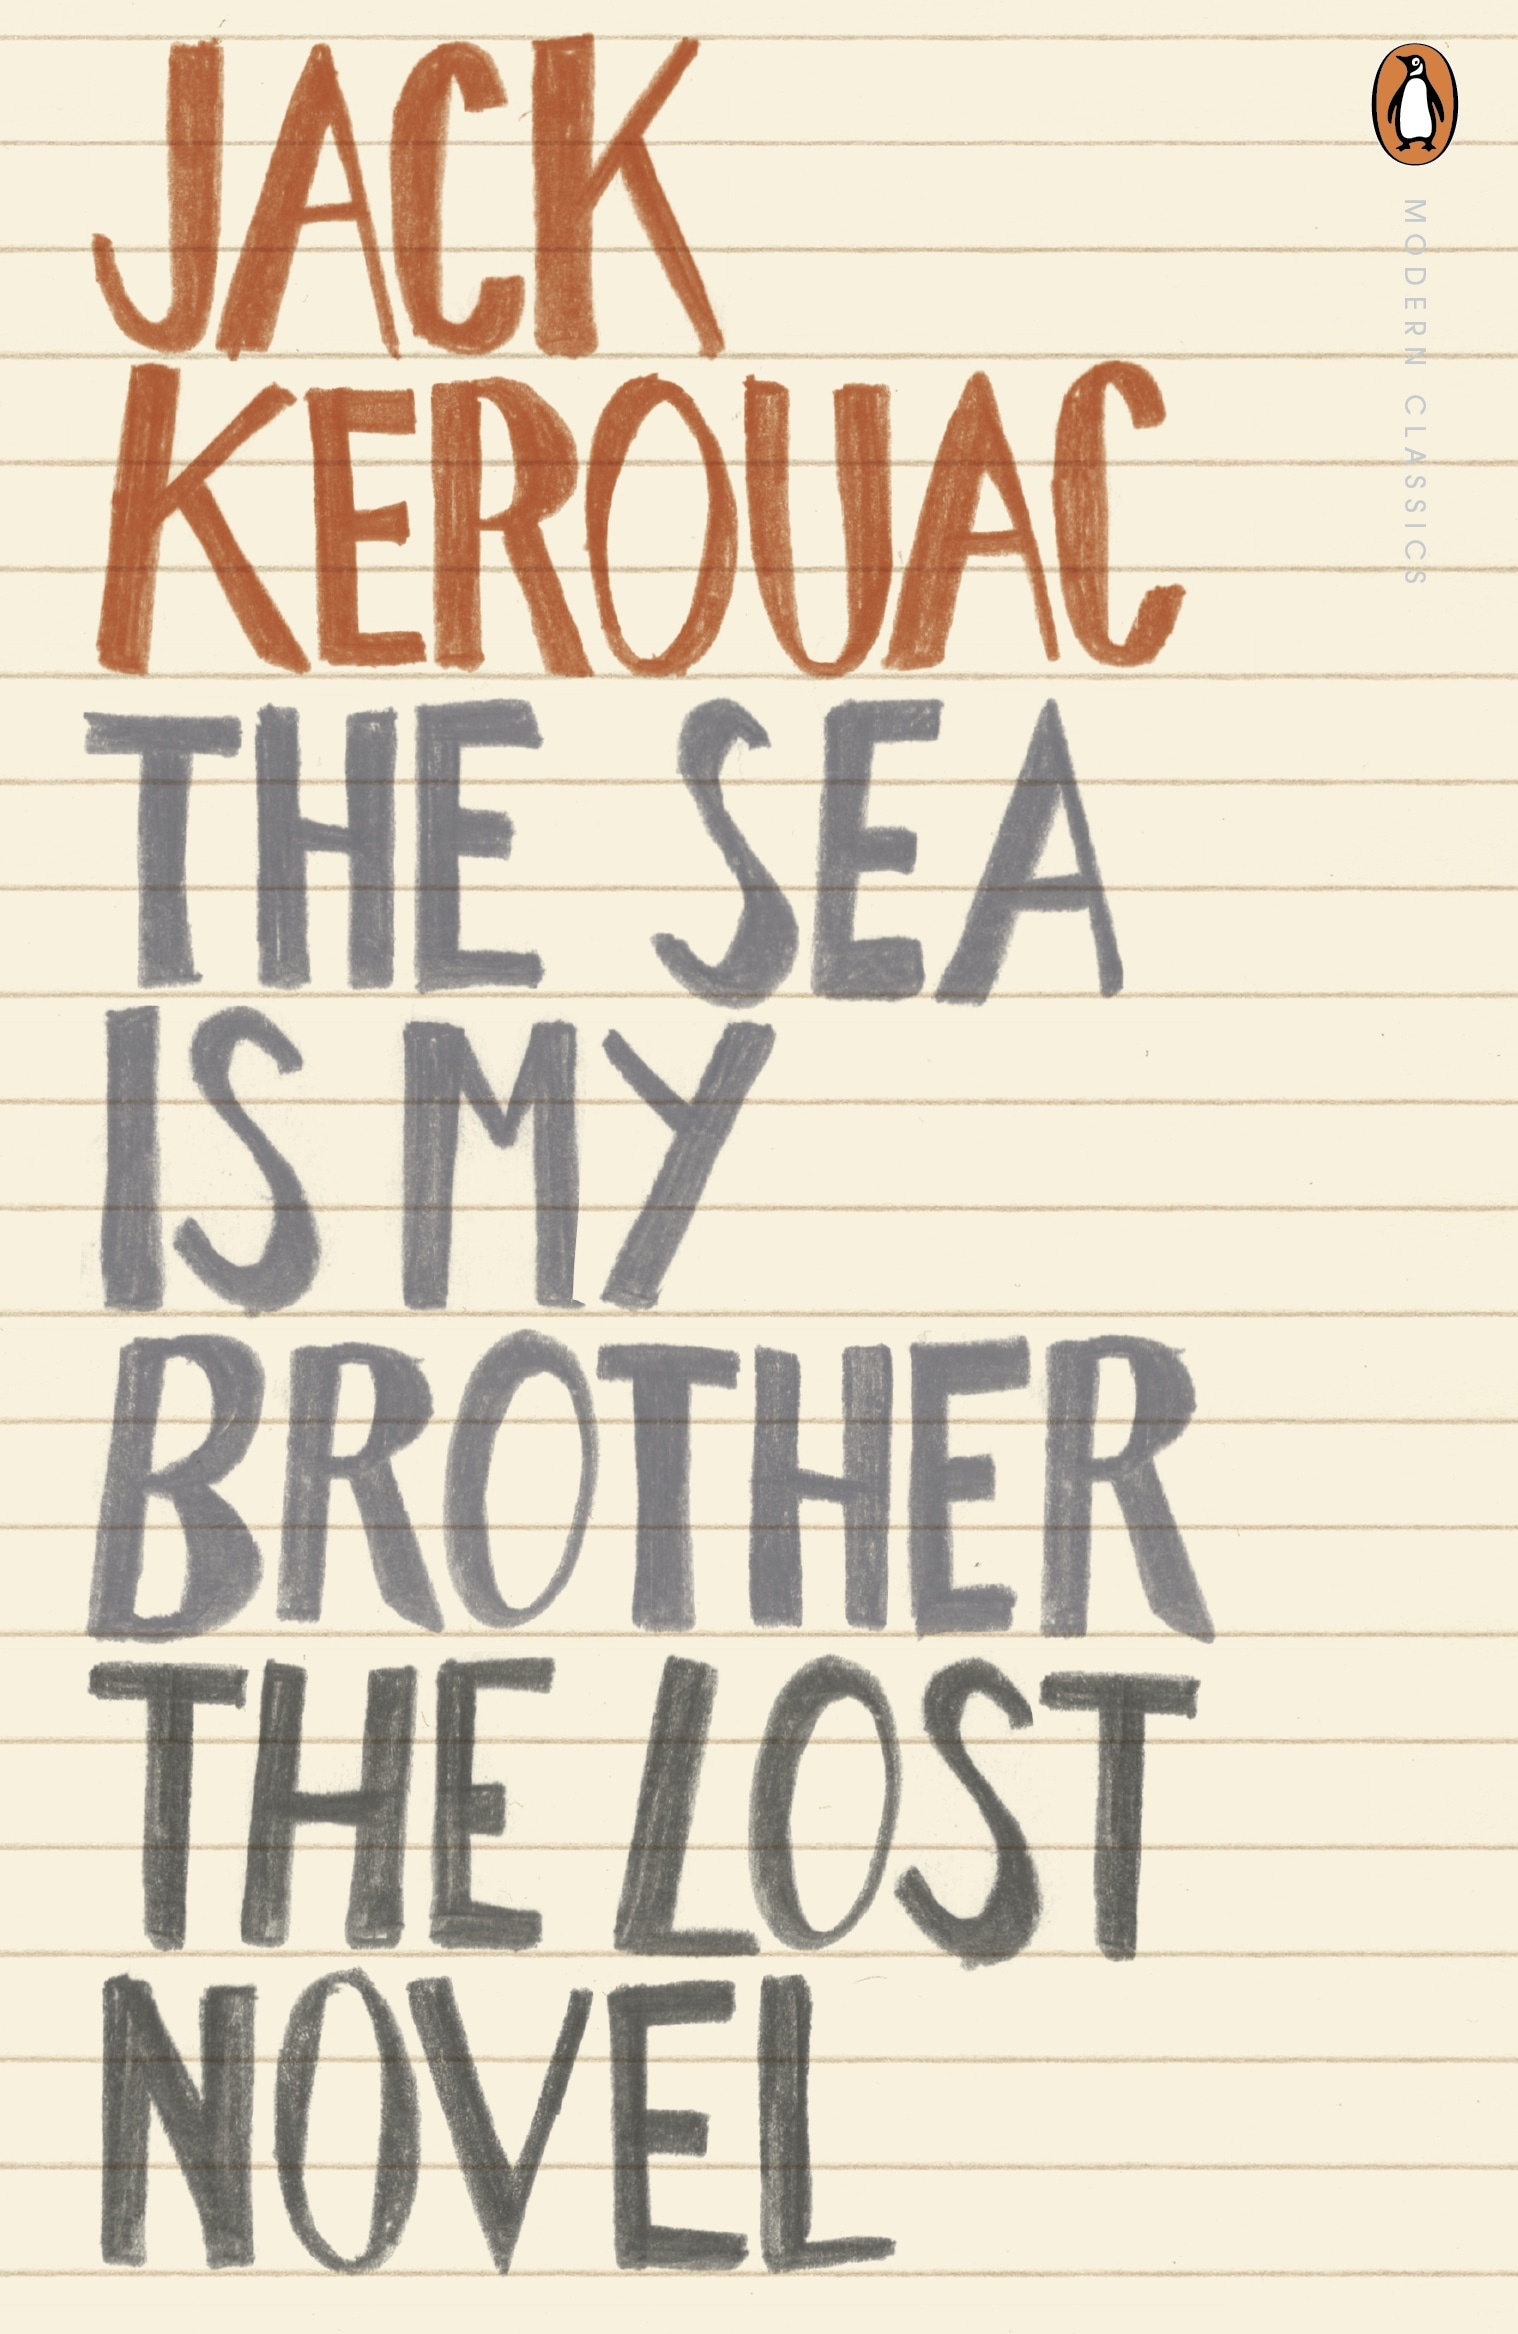 Book “The Sea is My Brother” by Jack Kerouac — November 29, 2012